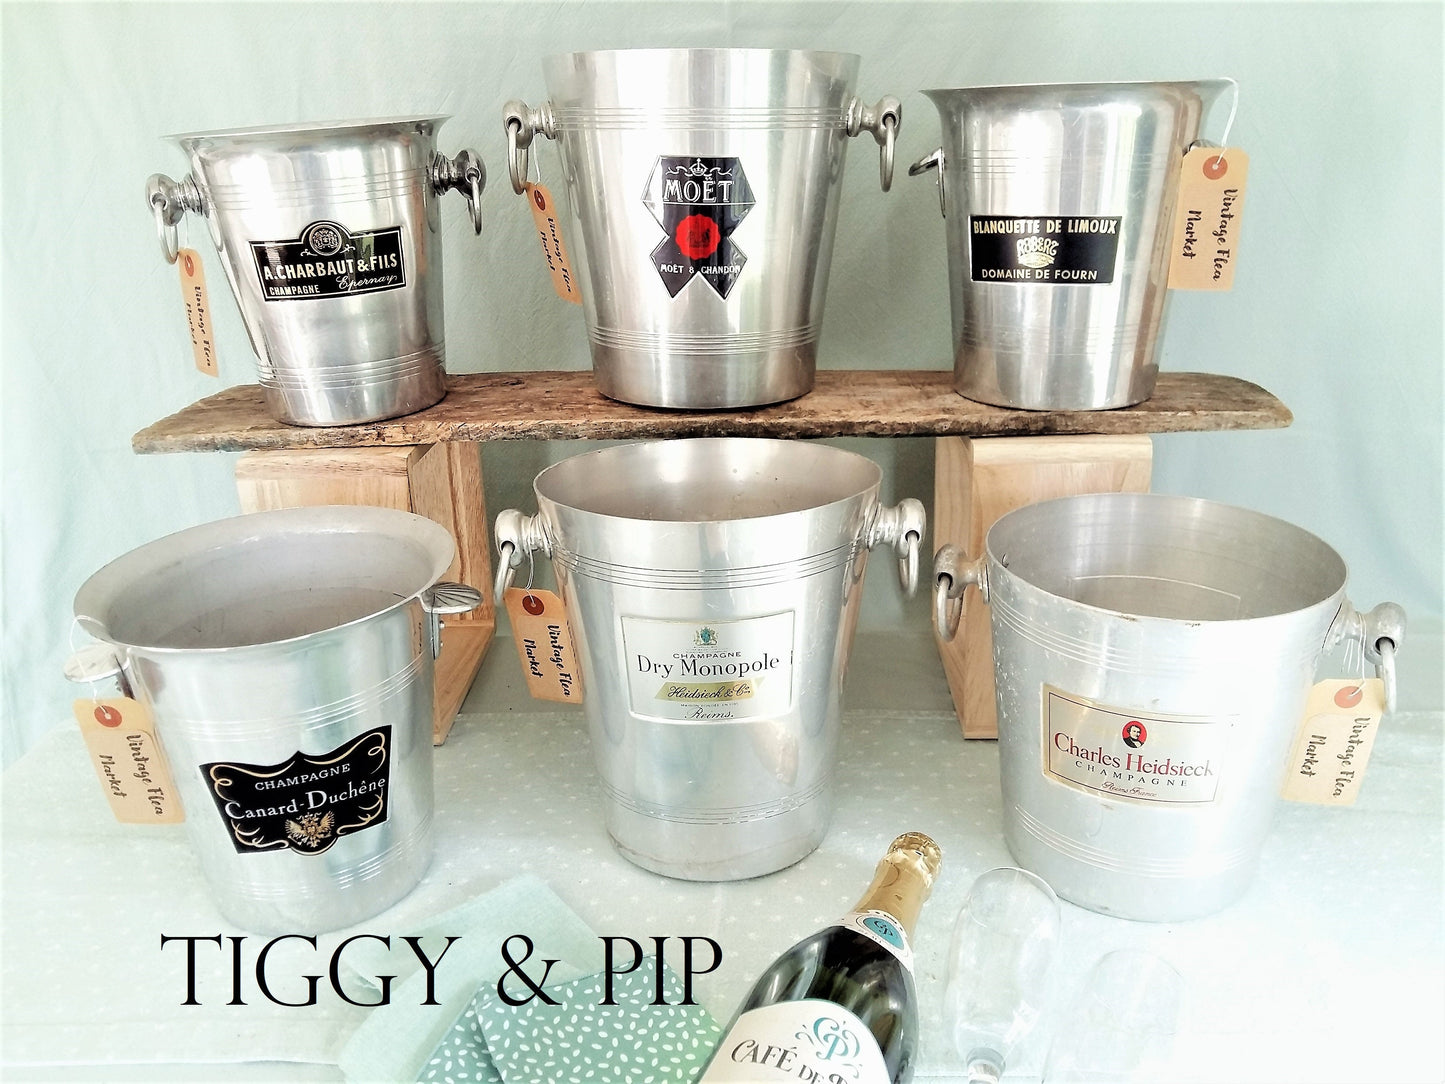 French Champagne Ice Buckets from Tiggy & Pip - €59.00! Shop now at Tiggy and Pip